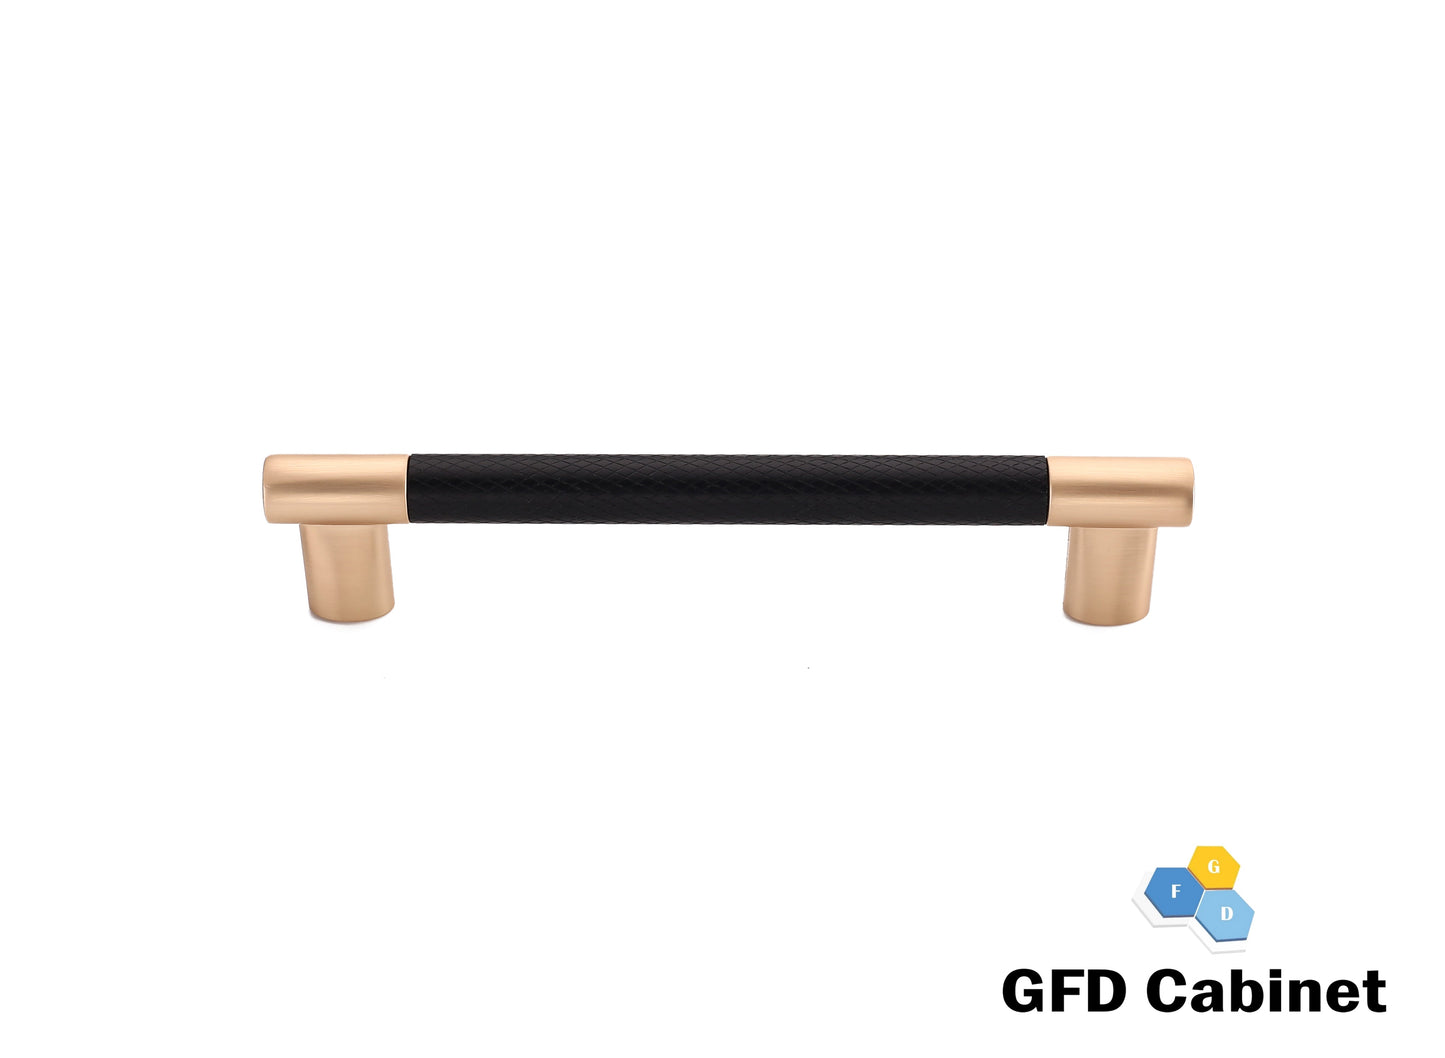 H-4496-128 5-1/16 in. (128 mm) Center-to-Center Cabinet Dual Color T-Bar Pull Handle